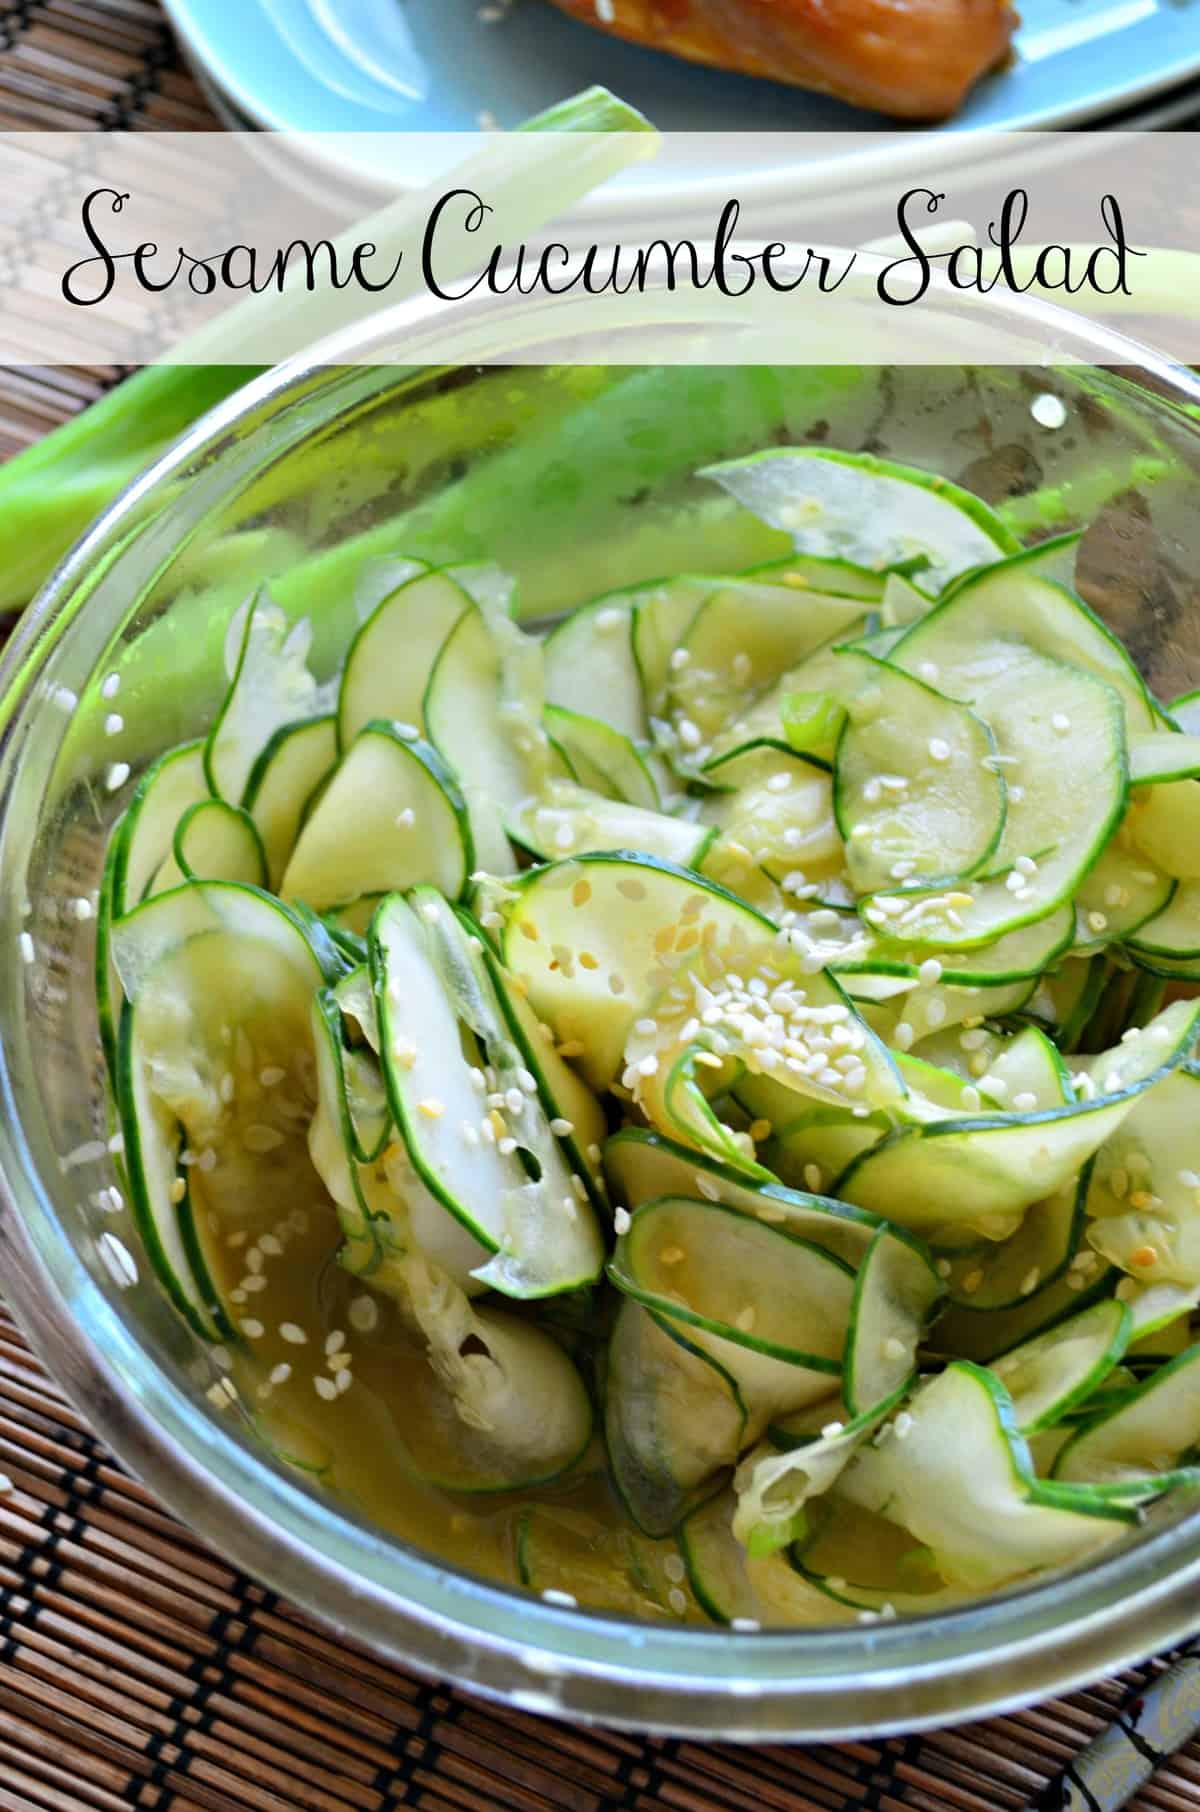 Close up of thinly sliced cucumbers with sesame seeds in a glass bowl with text on image.